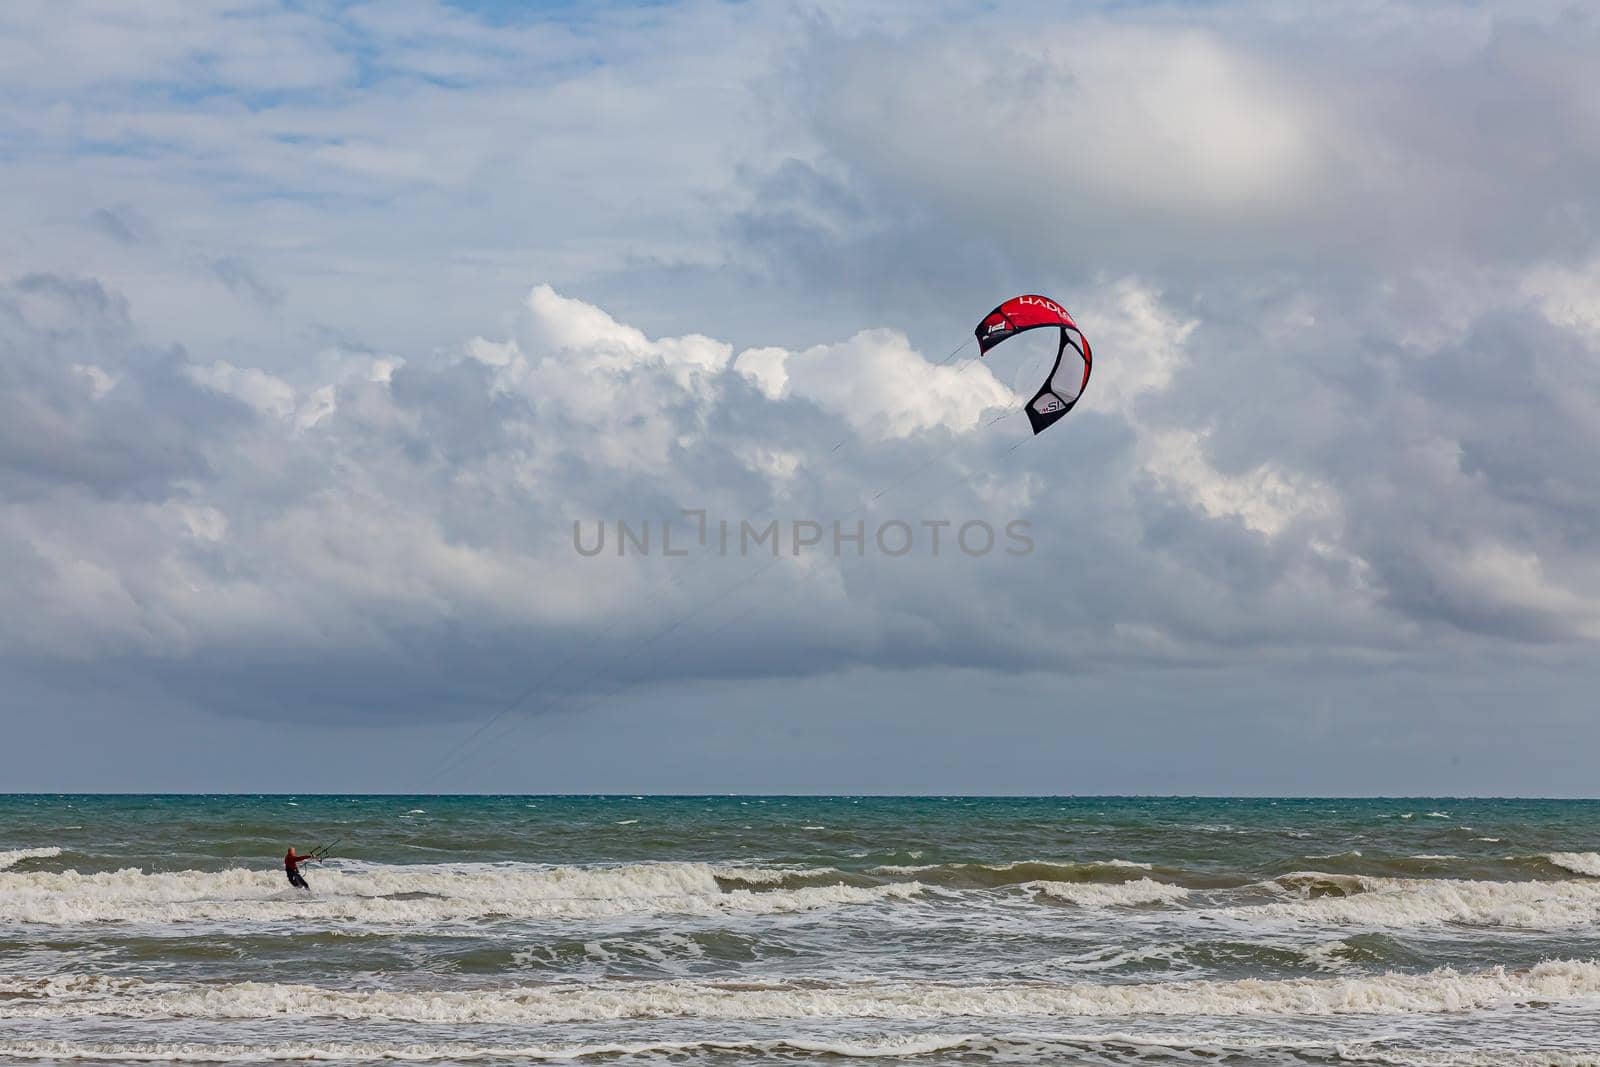 Professional kiter makes the difficult trick on a beautiful background. Kitesurfing Kiteboarding action photos man among waves quickly goes.